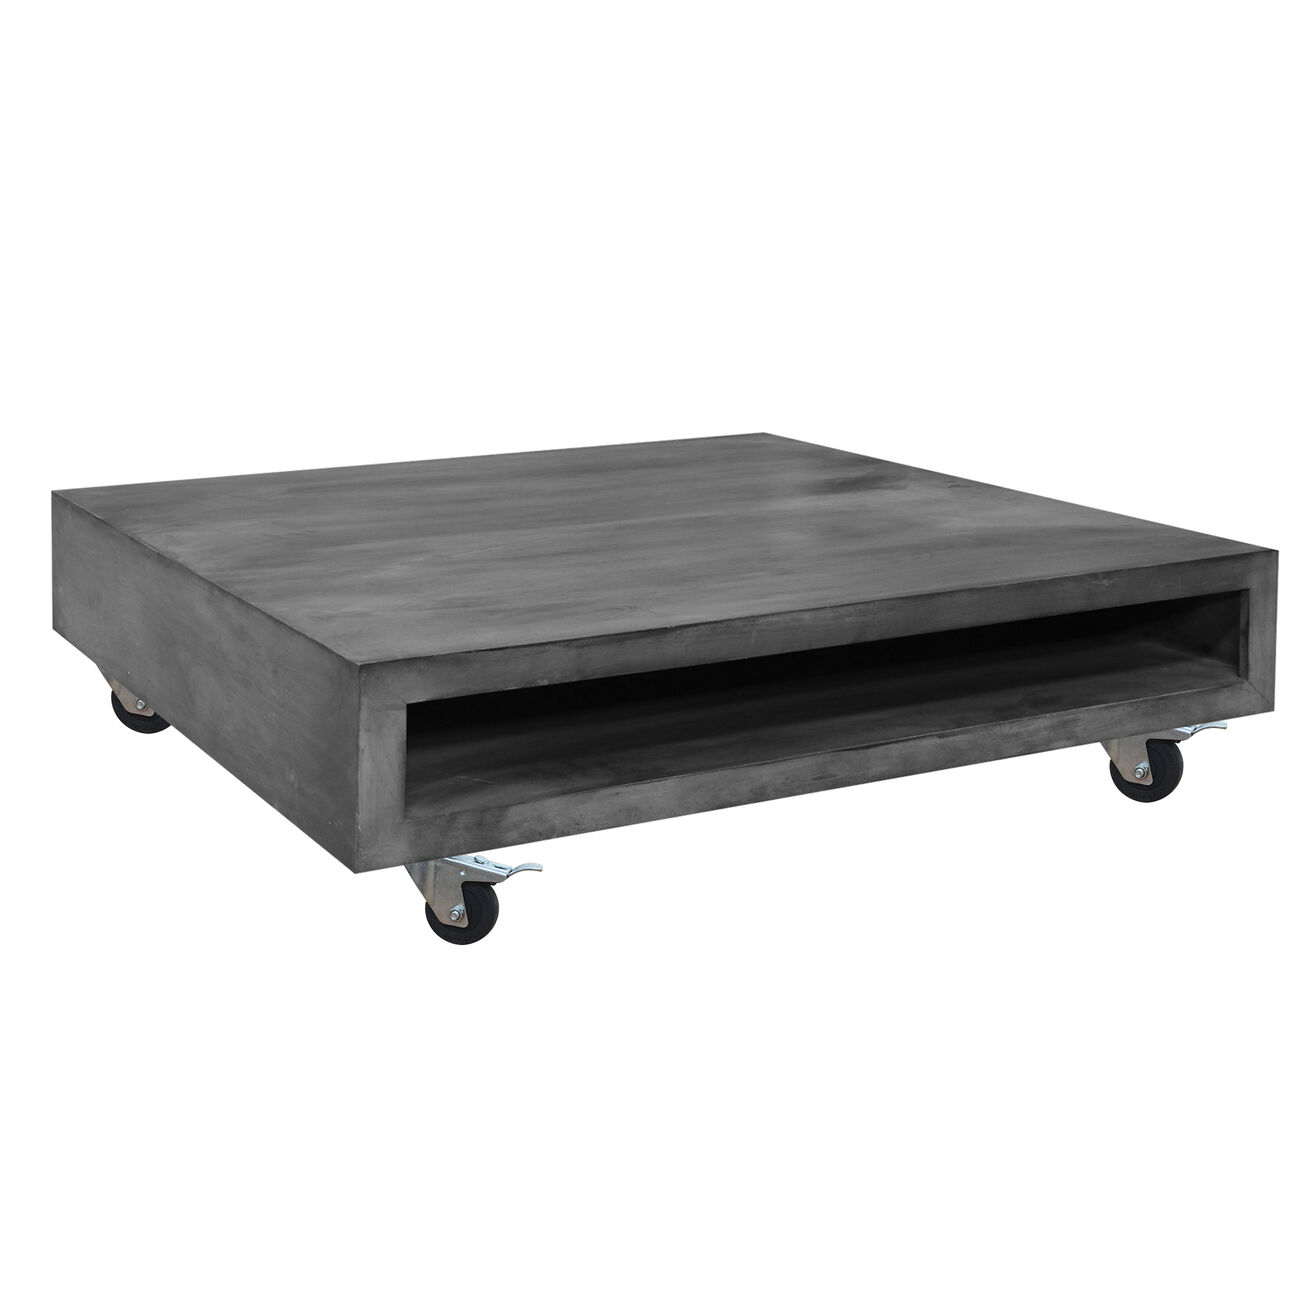 Square Mango Wood Coffee Table with Casters and Open Storage Compartment, Grey